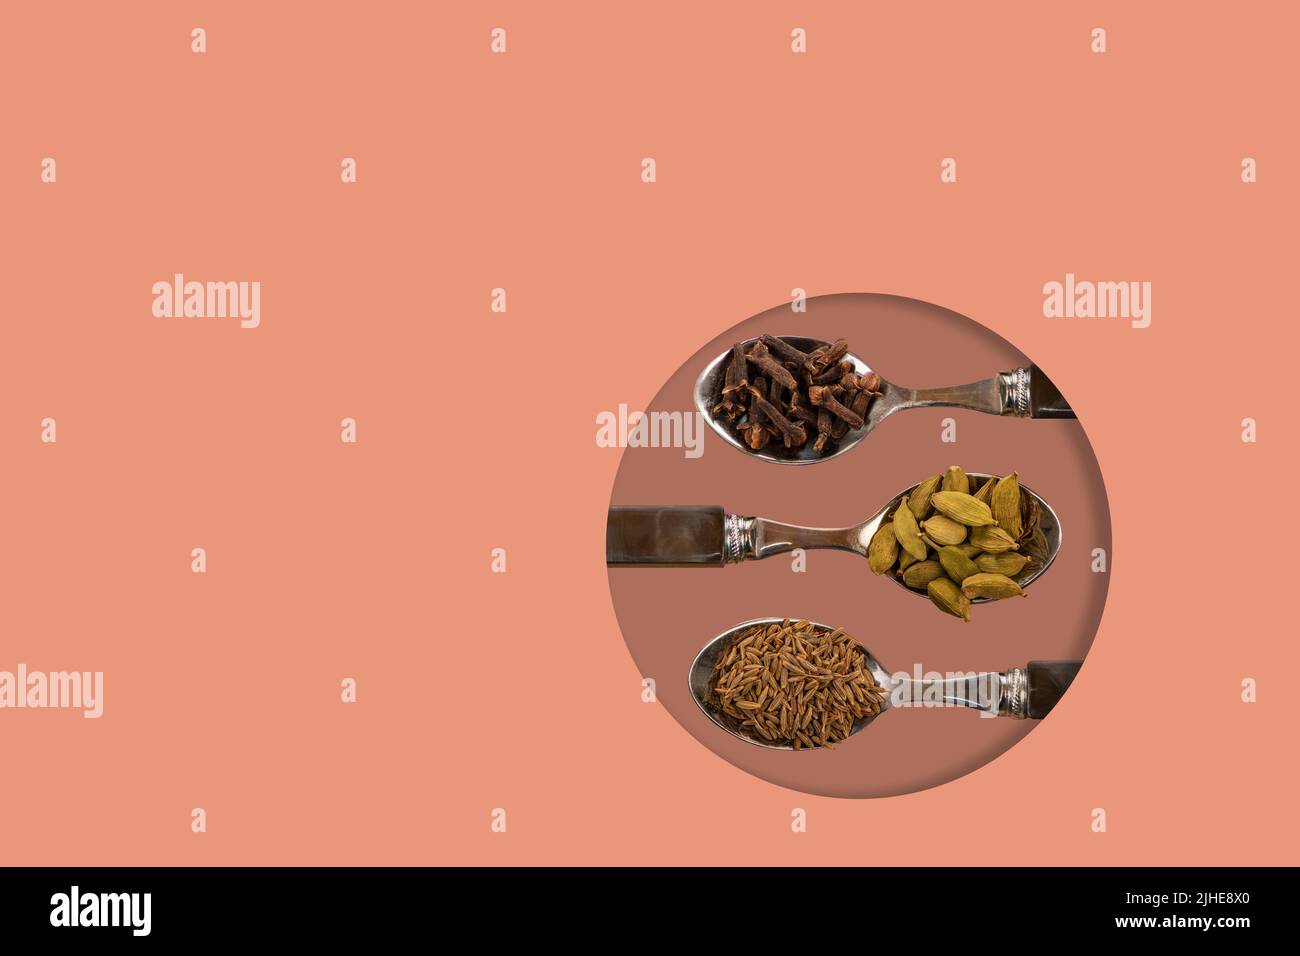 selection assorted indian spices cumin seeds cardamom cardamon pods cloves display on spoons on a colorful colourful peach background Stock Photo